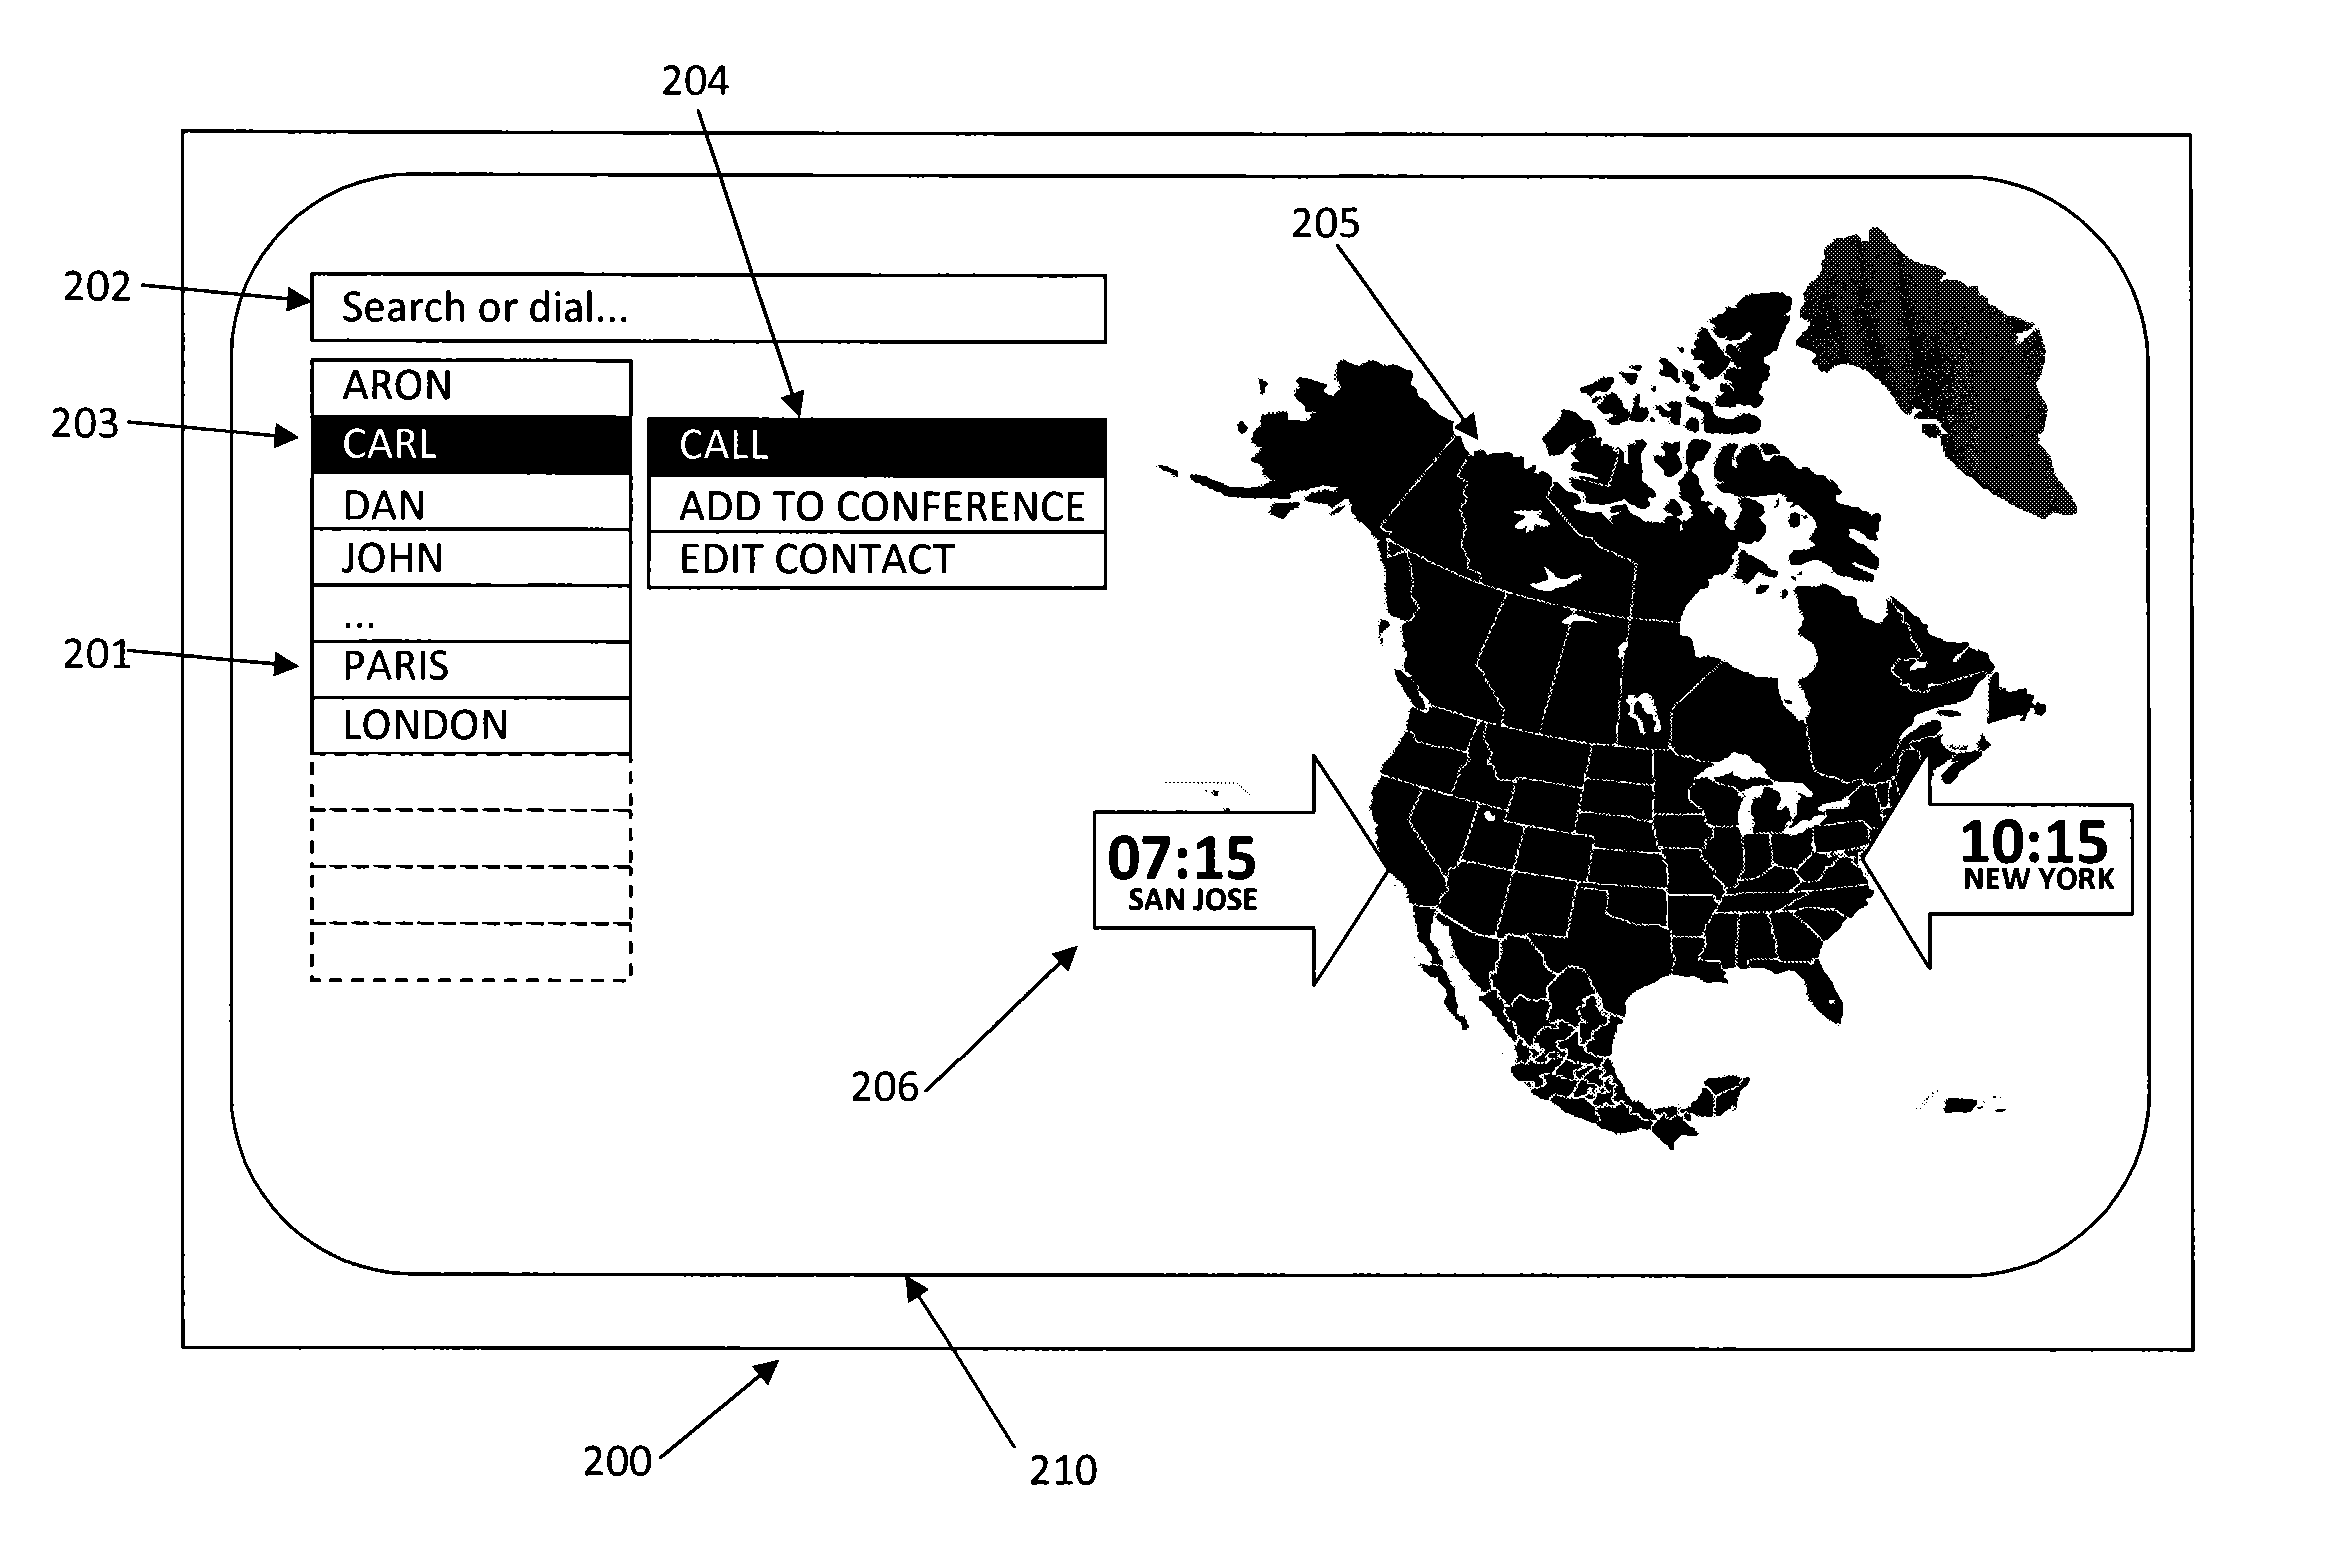 Apparatus and method for creating situation awareness when scheduling conference calls